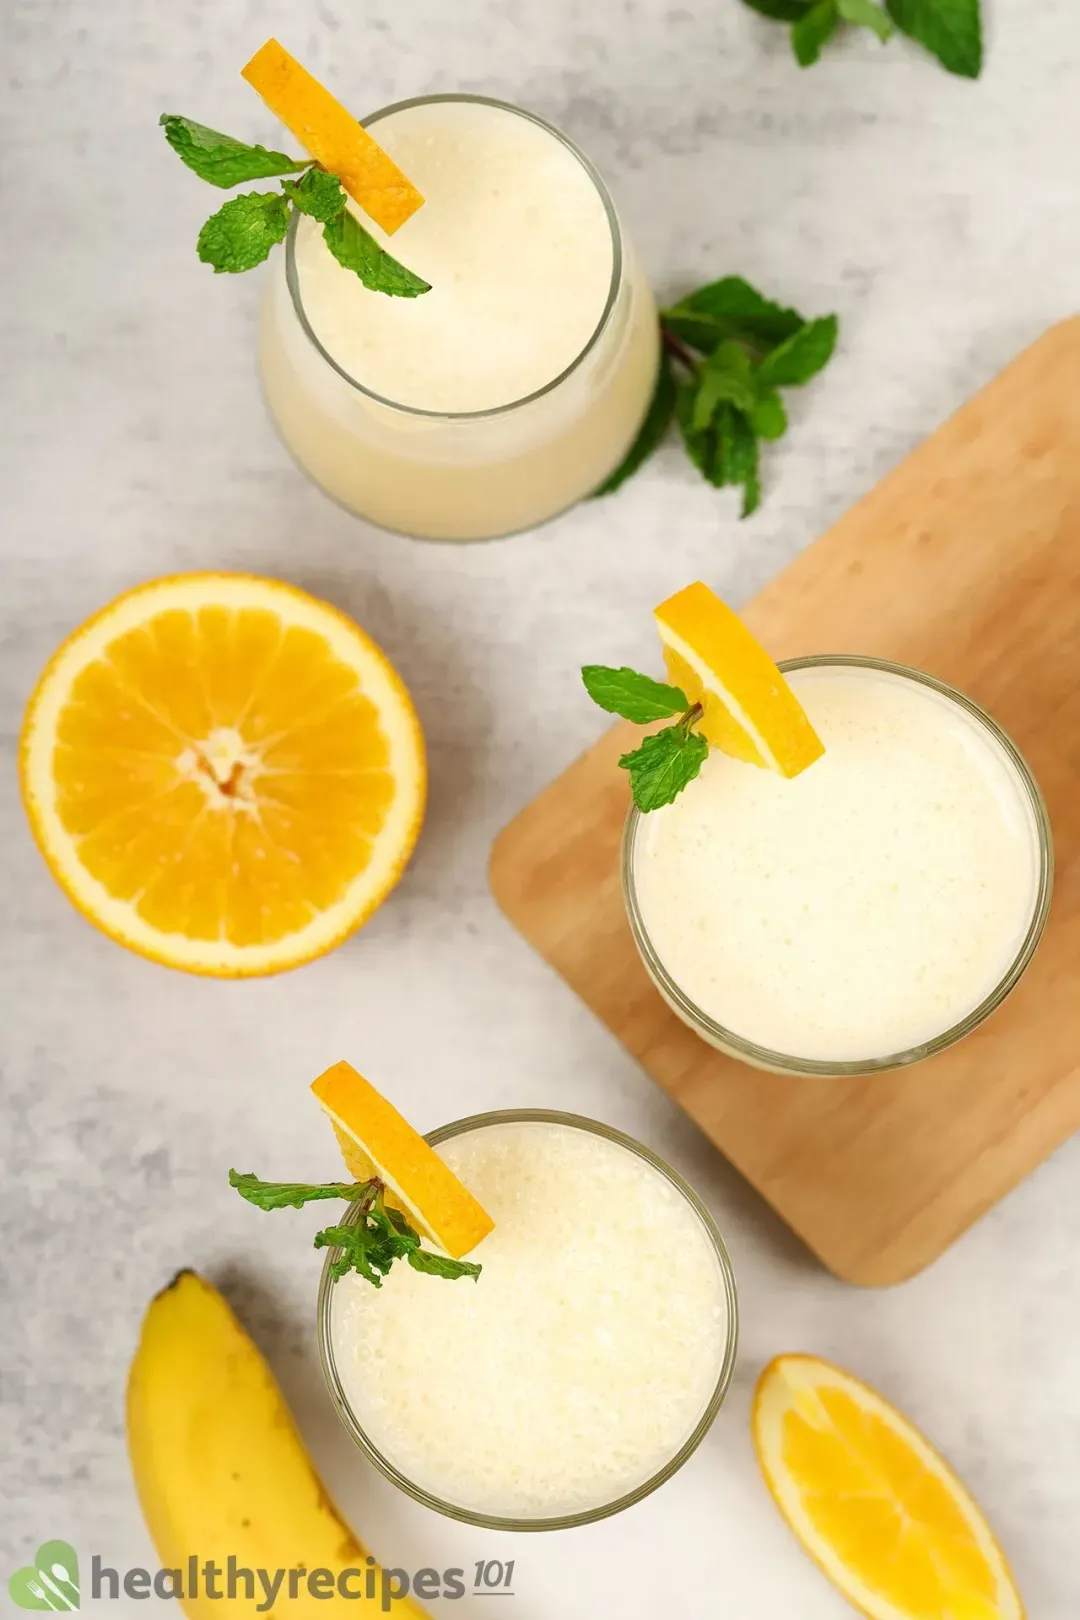 Our Orange Creamsicle Smoothie Is a Healthy Treat Too